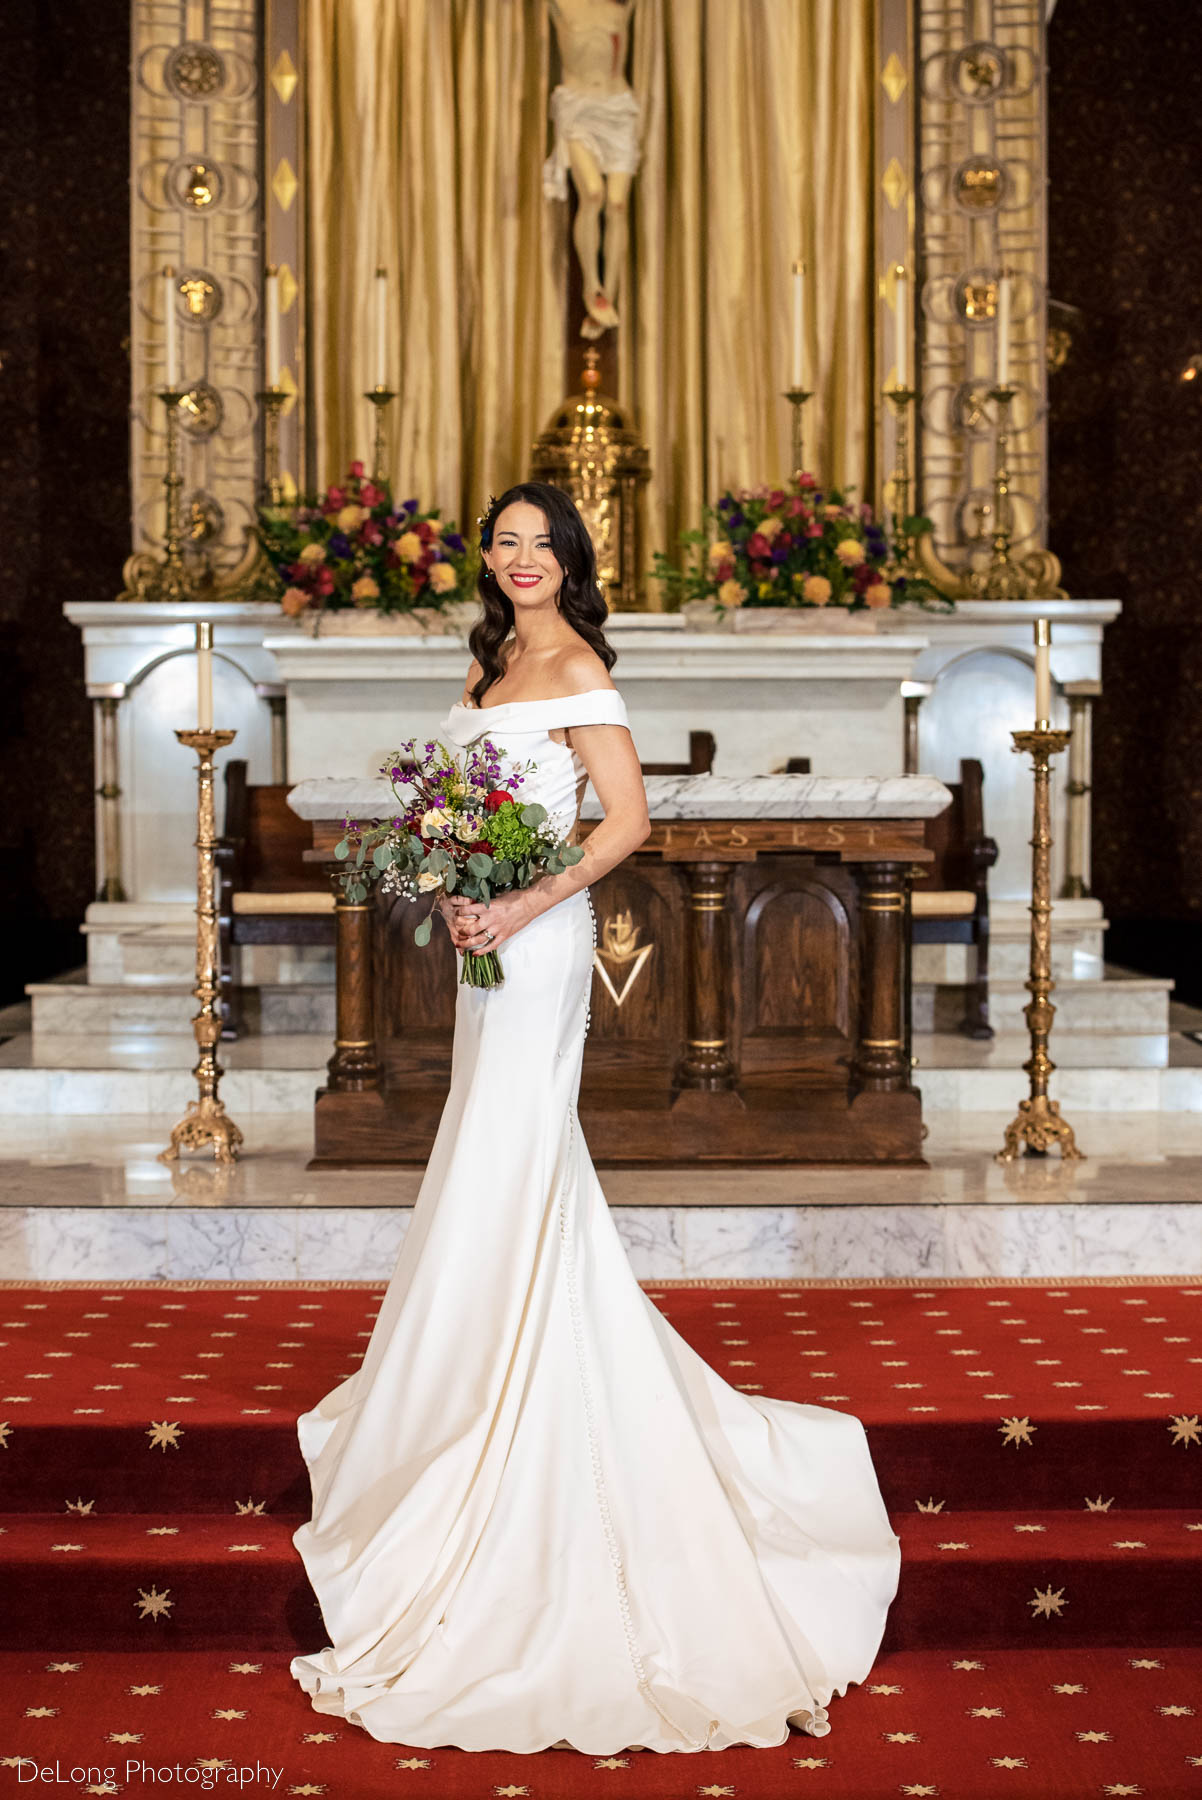 Formal bridal portrait at the Basilica of the Sacred Heart of Jesus in Atlanta, GA by Charlotte wedding photographers DeLong Photography 